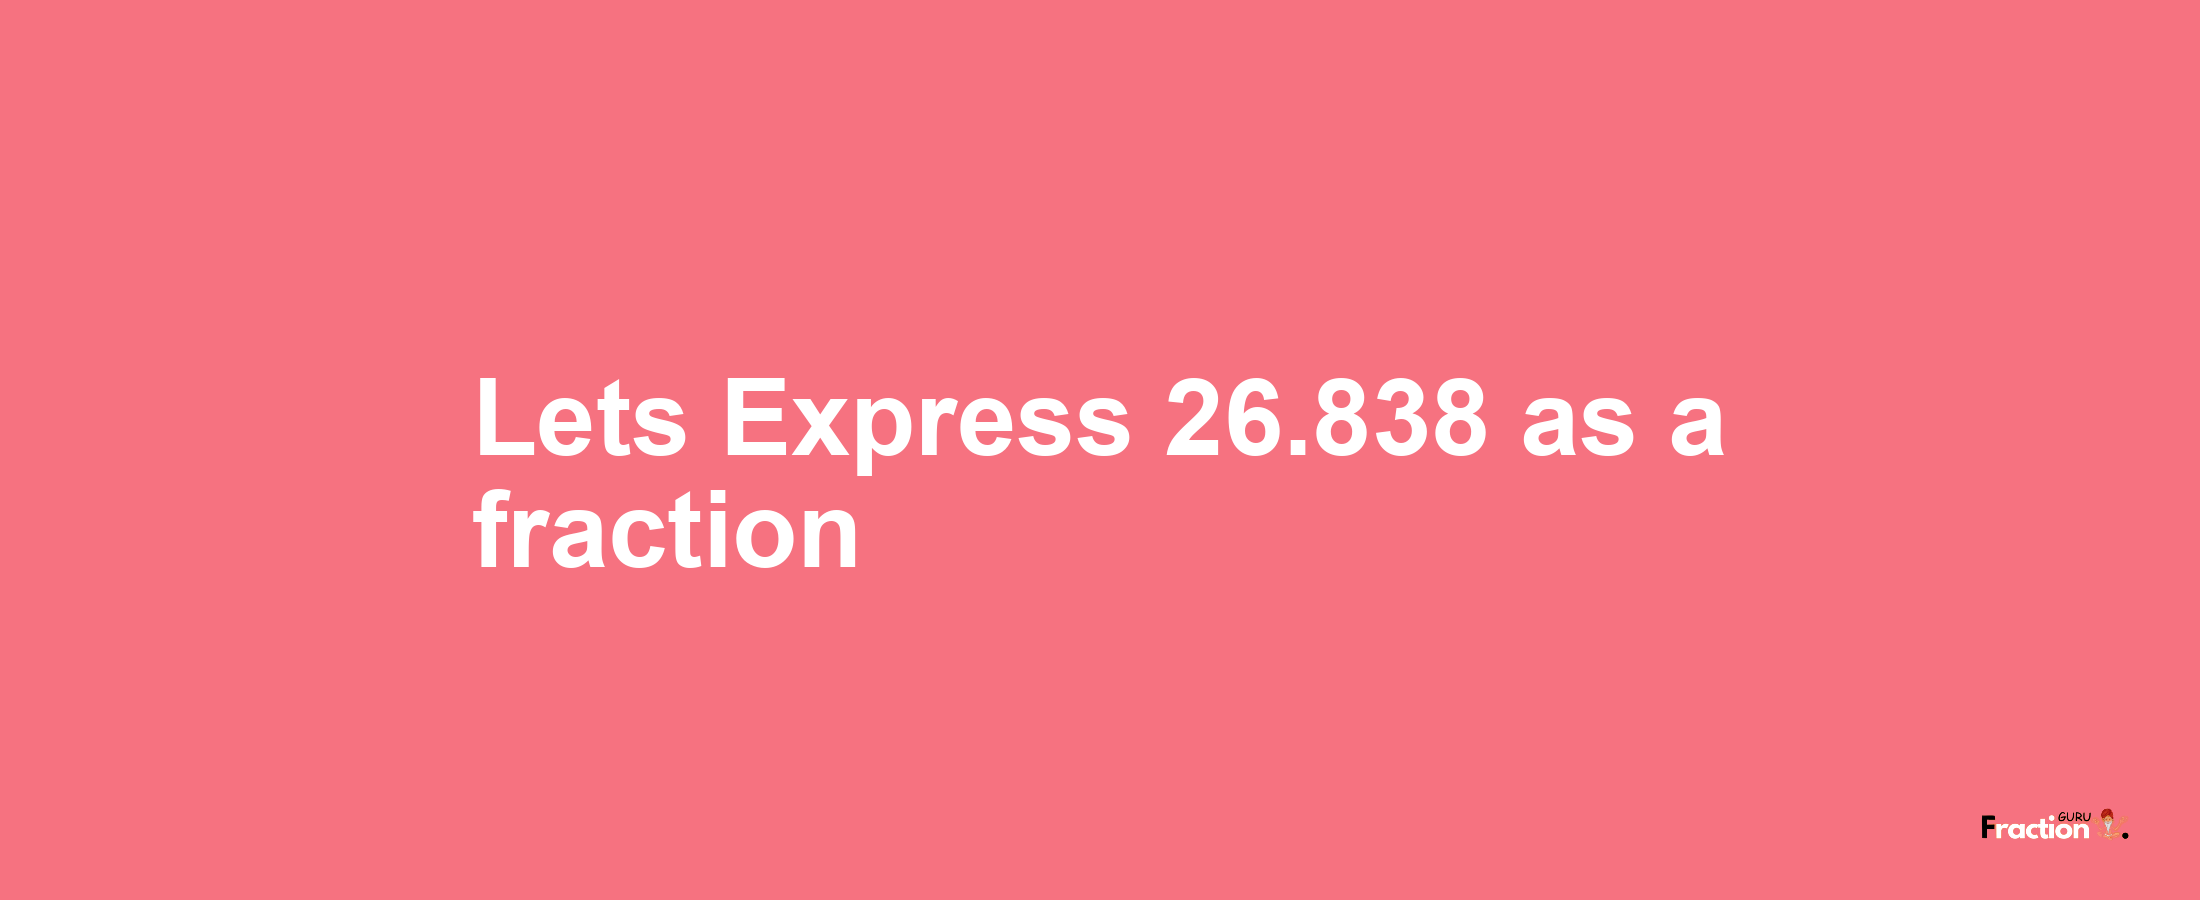 Lets Express 26.838 as afraction